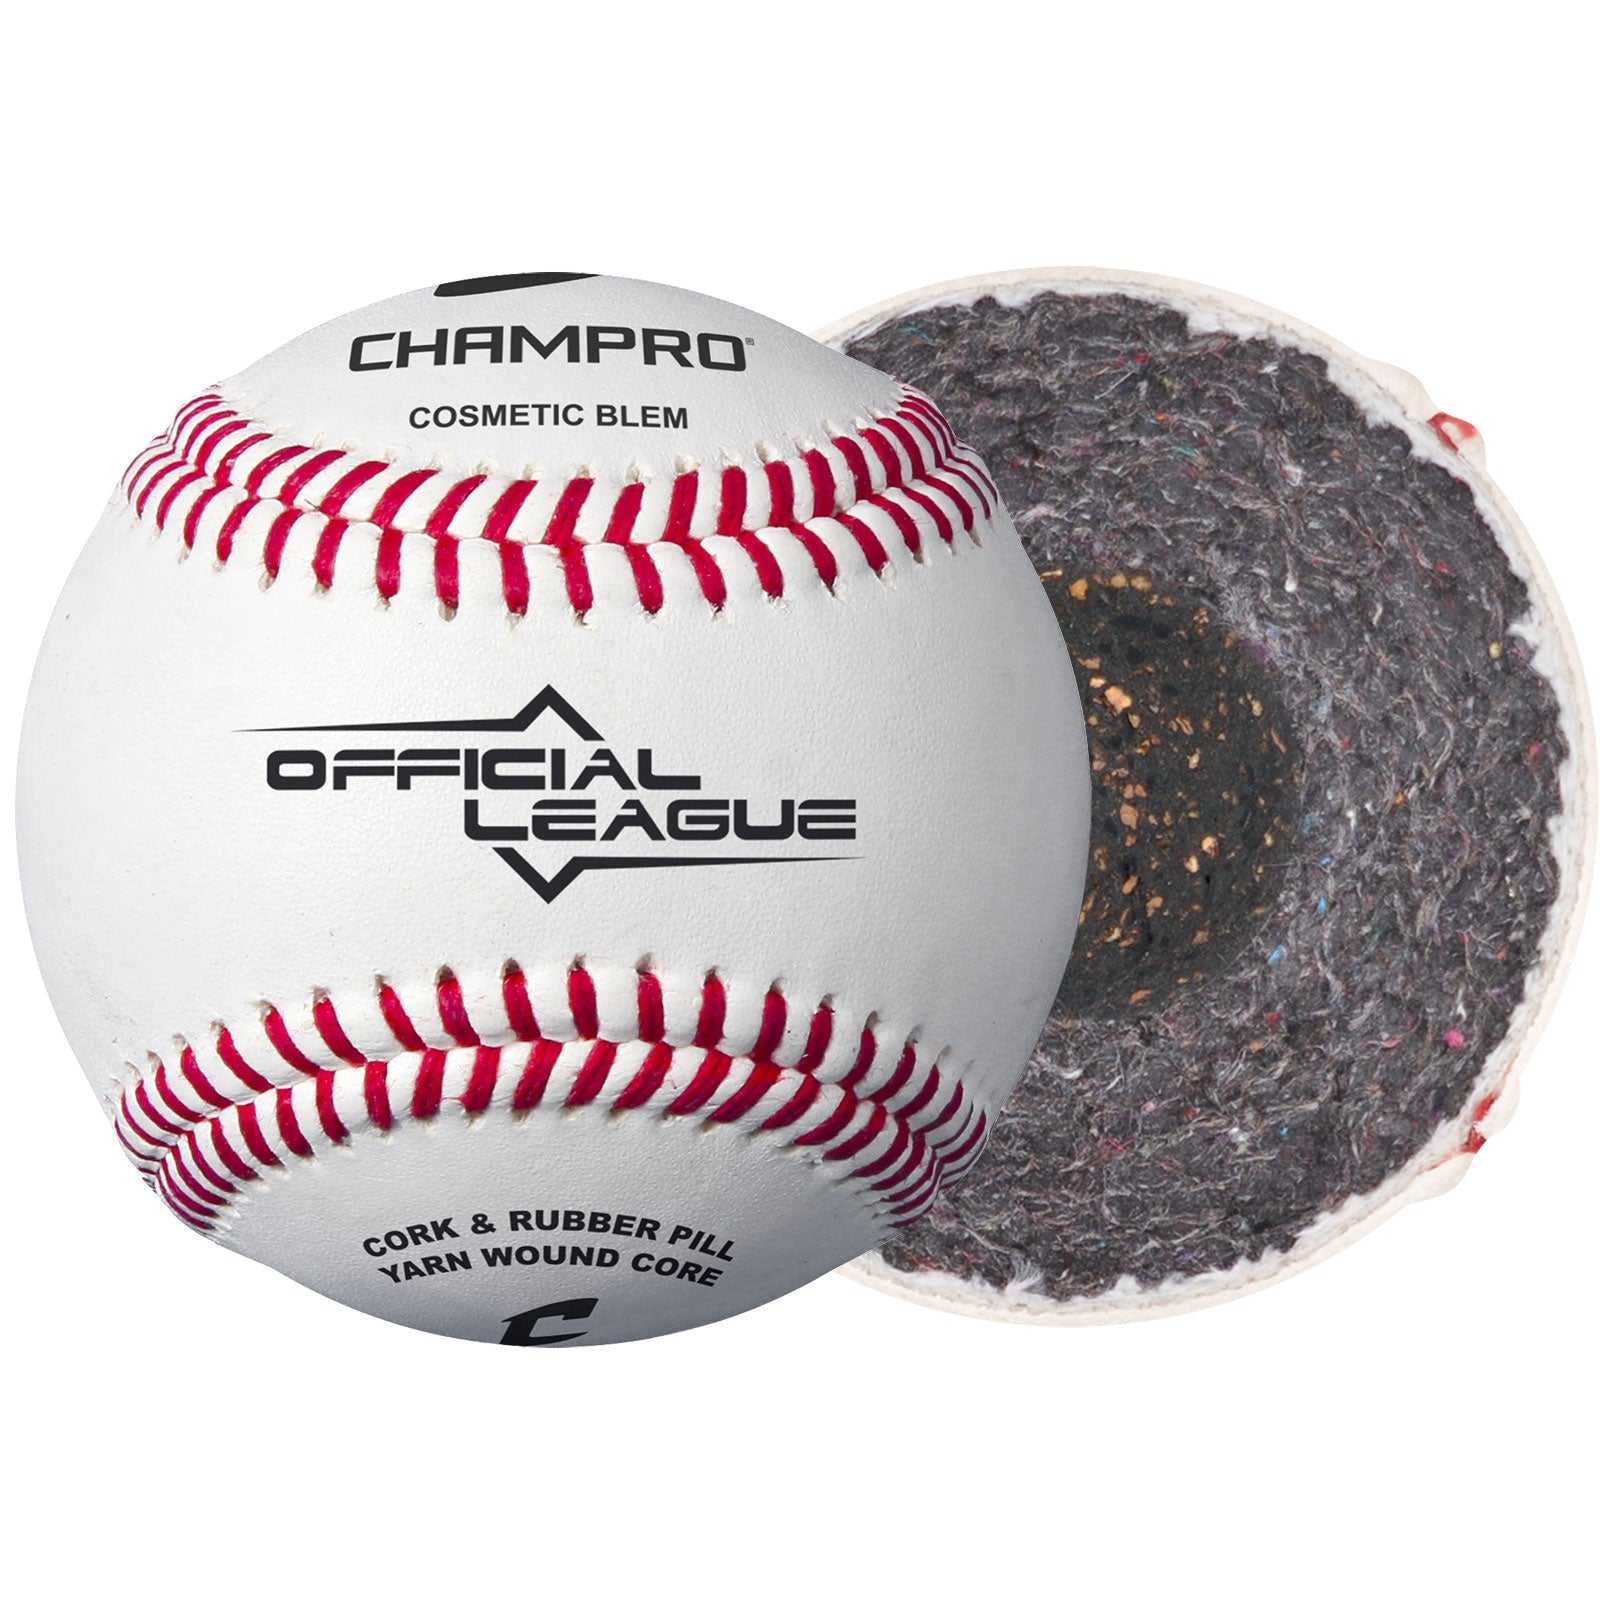 Champro CBB-200D Official LeagueFull Grain Leather Cover (Cosmetic Blem) - HIT a Double